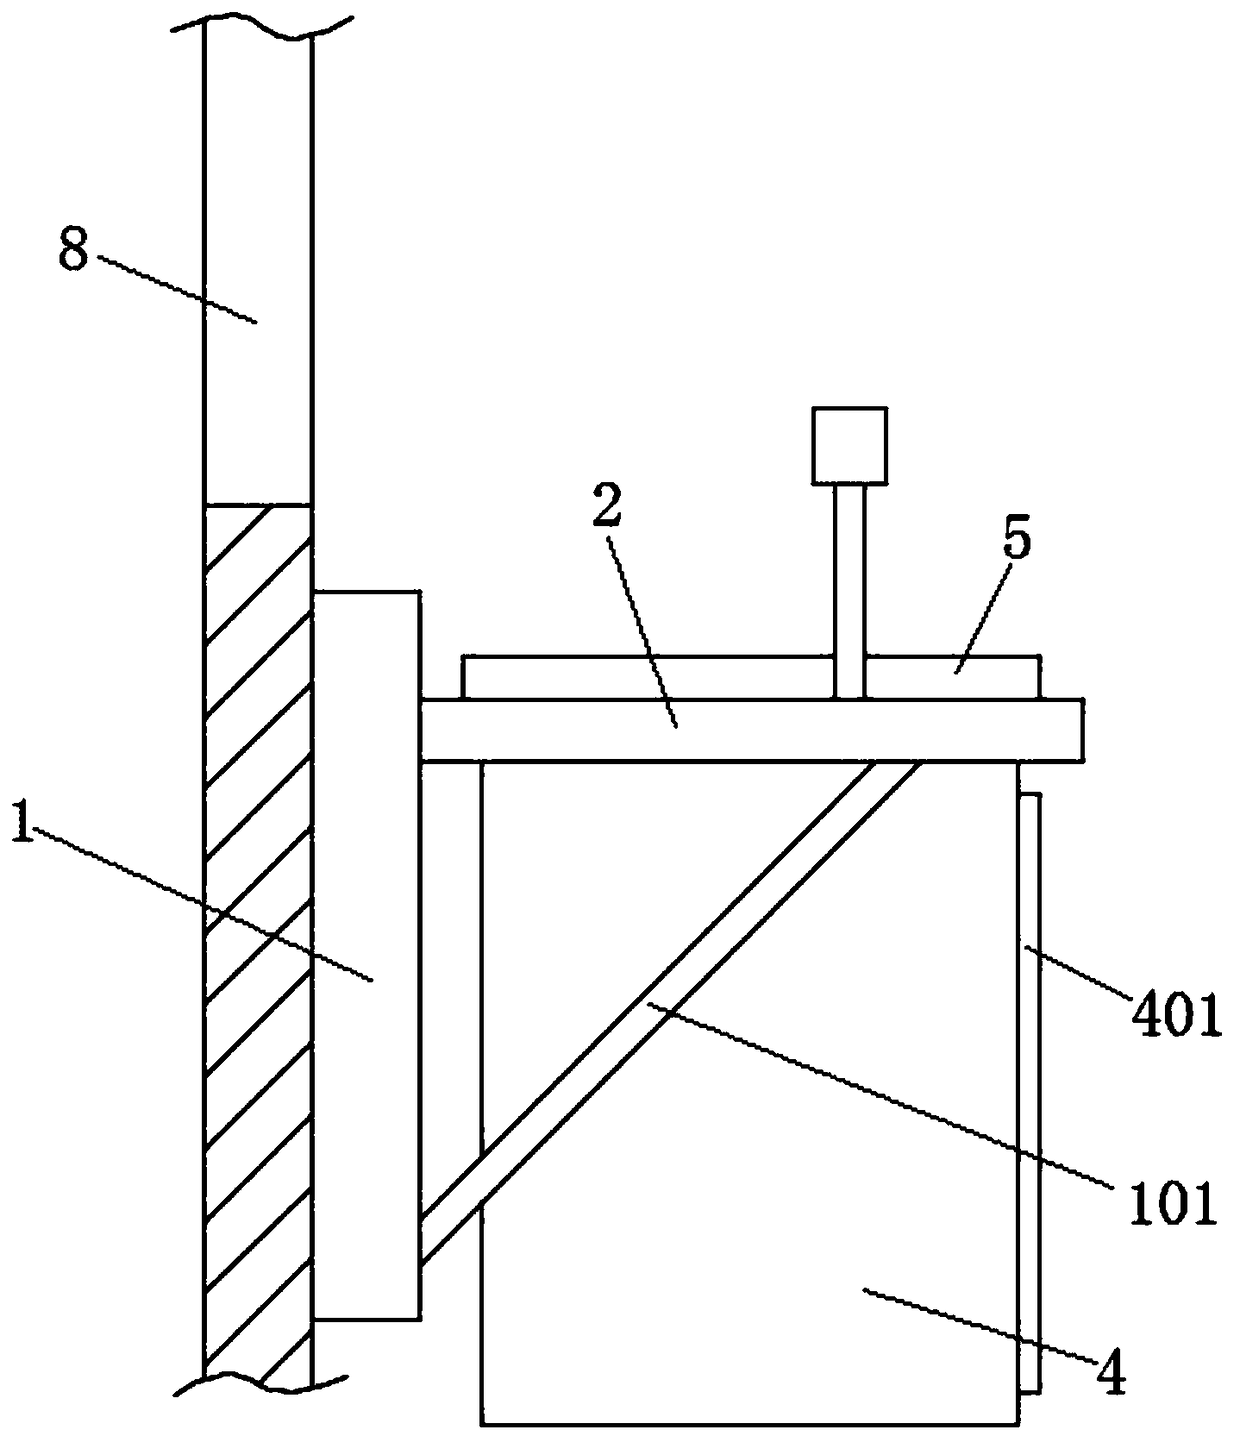 Flower and plant cultivation device suitable for windowsill